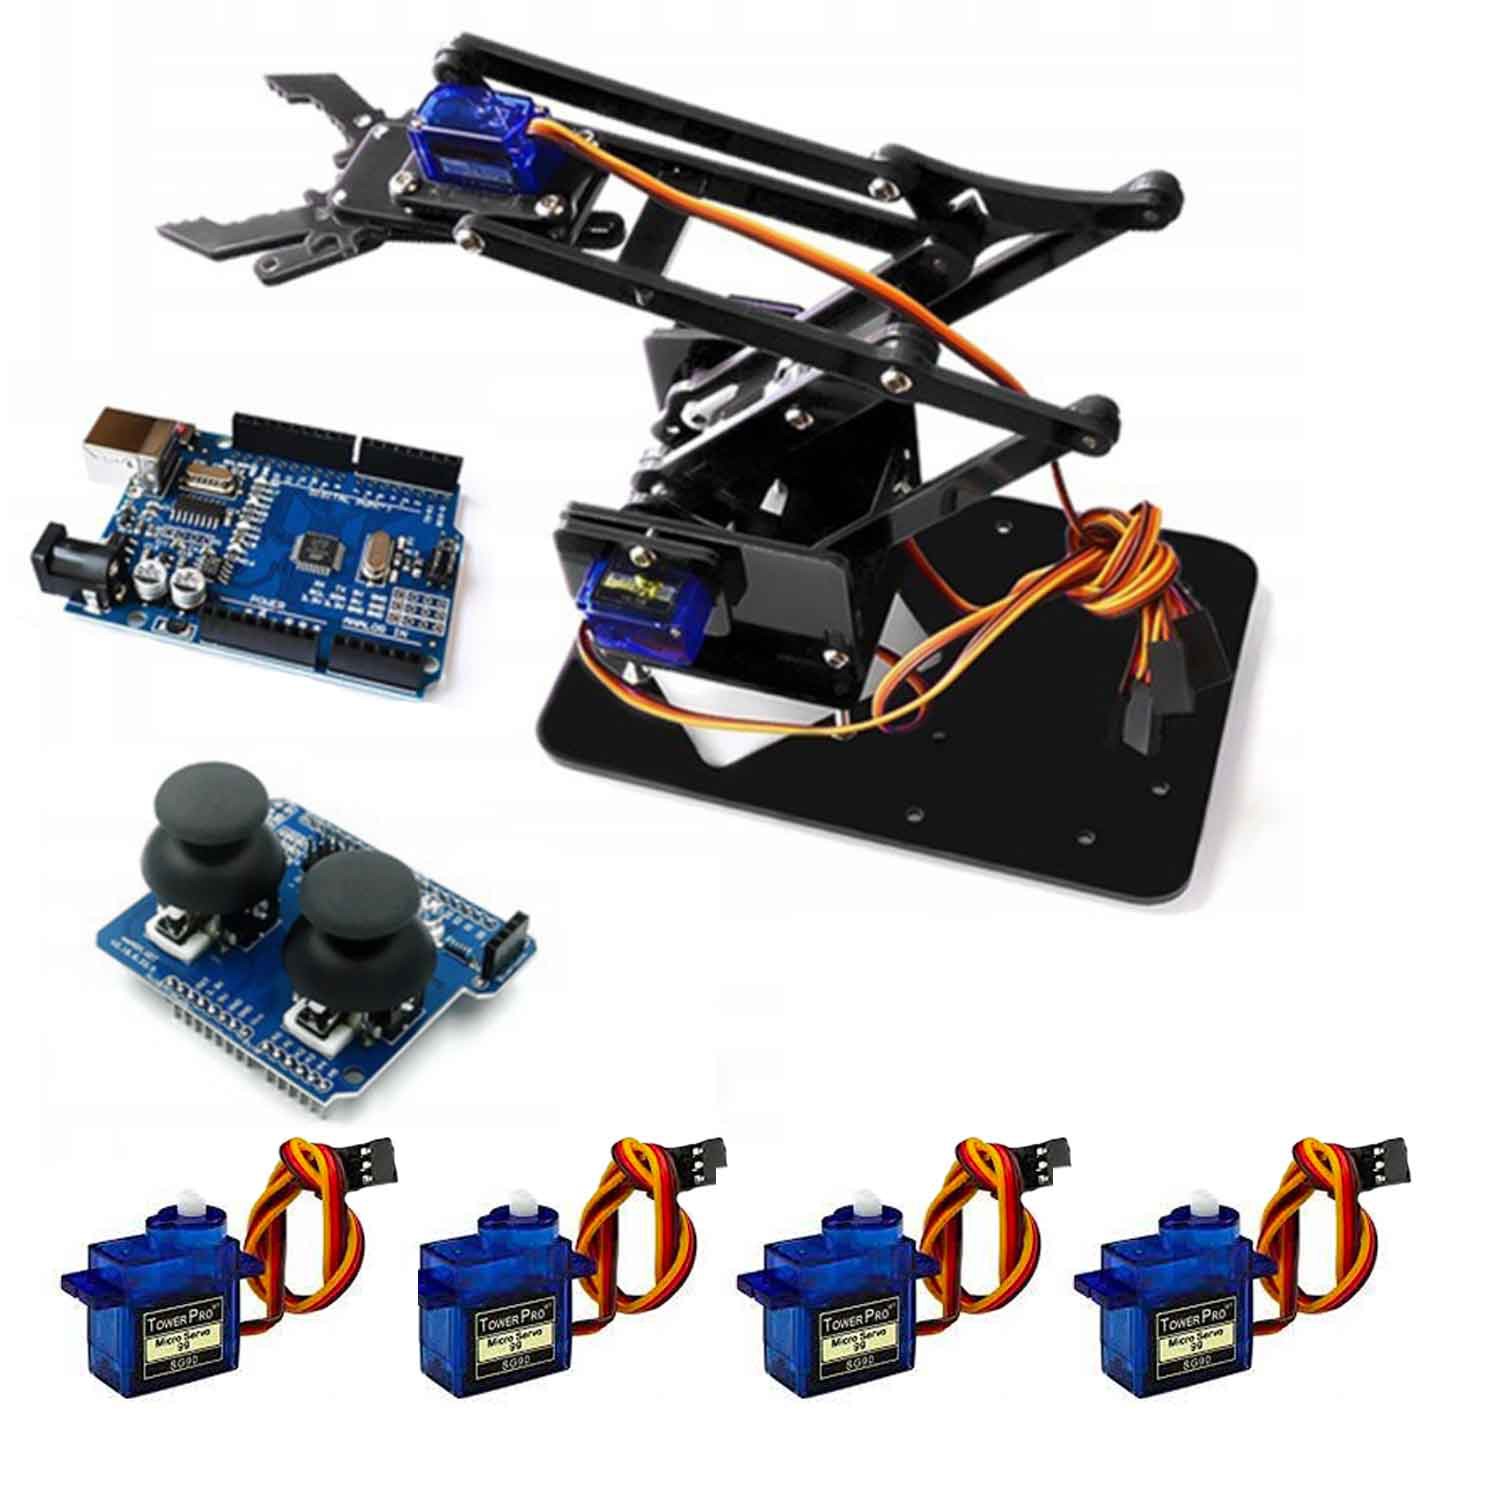 Kit Arduino Complet